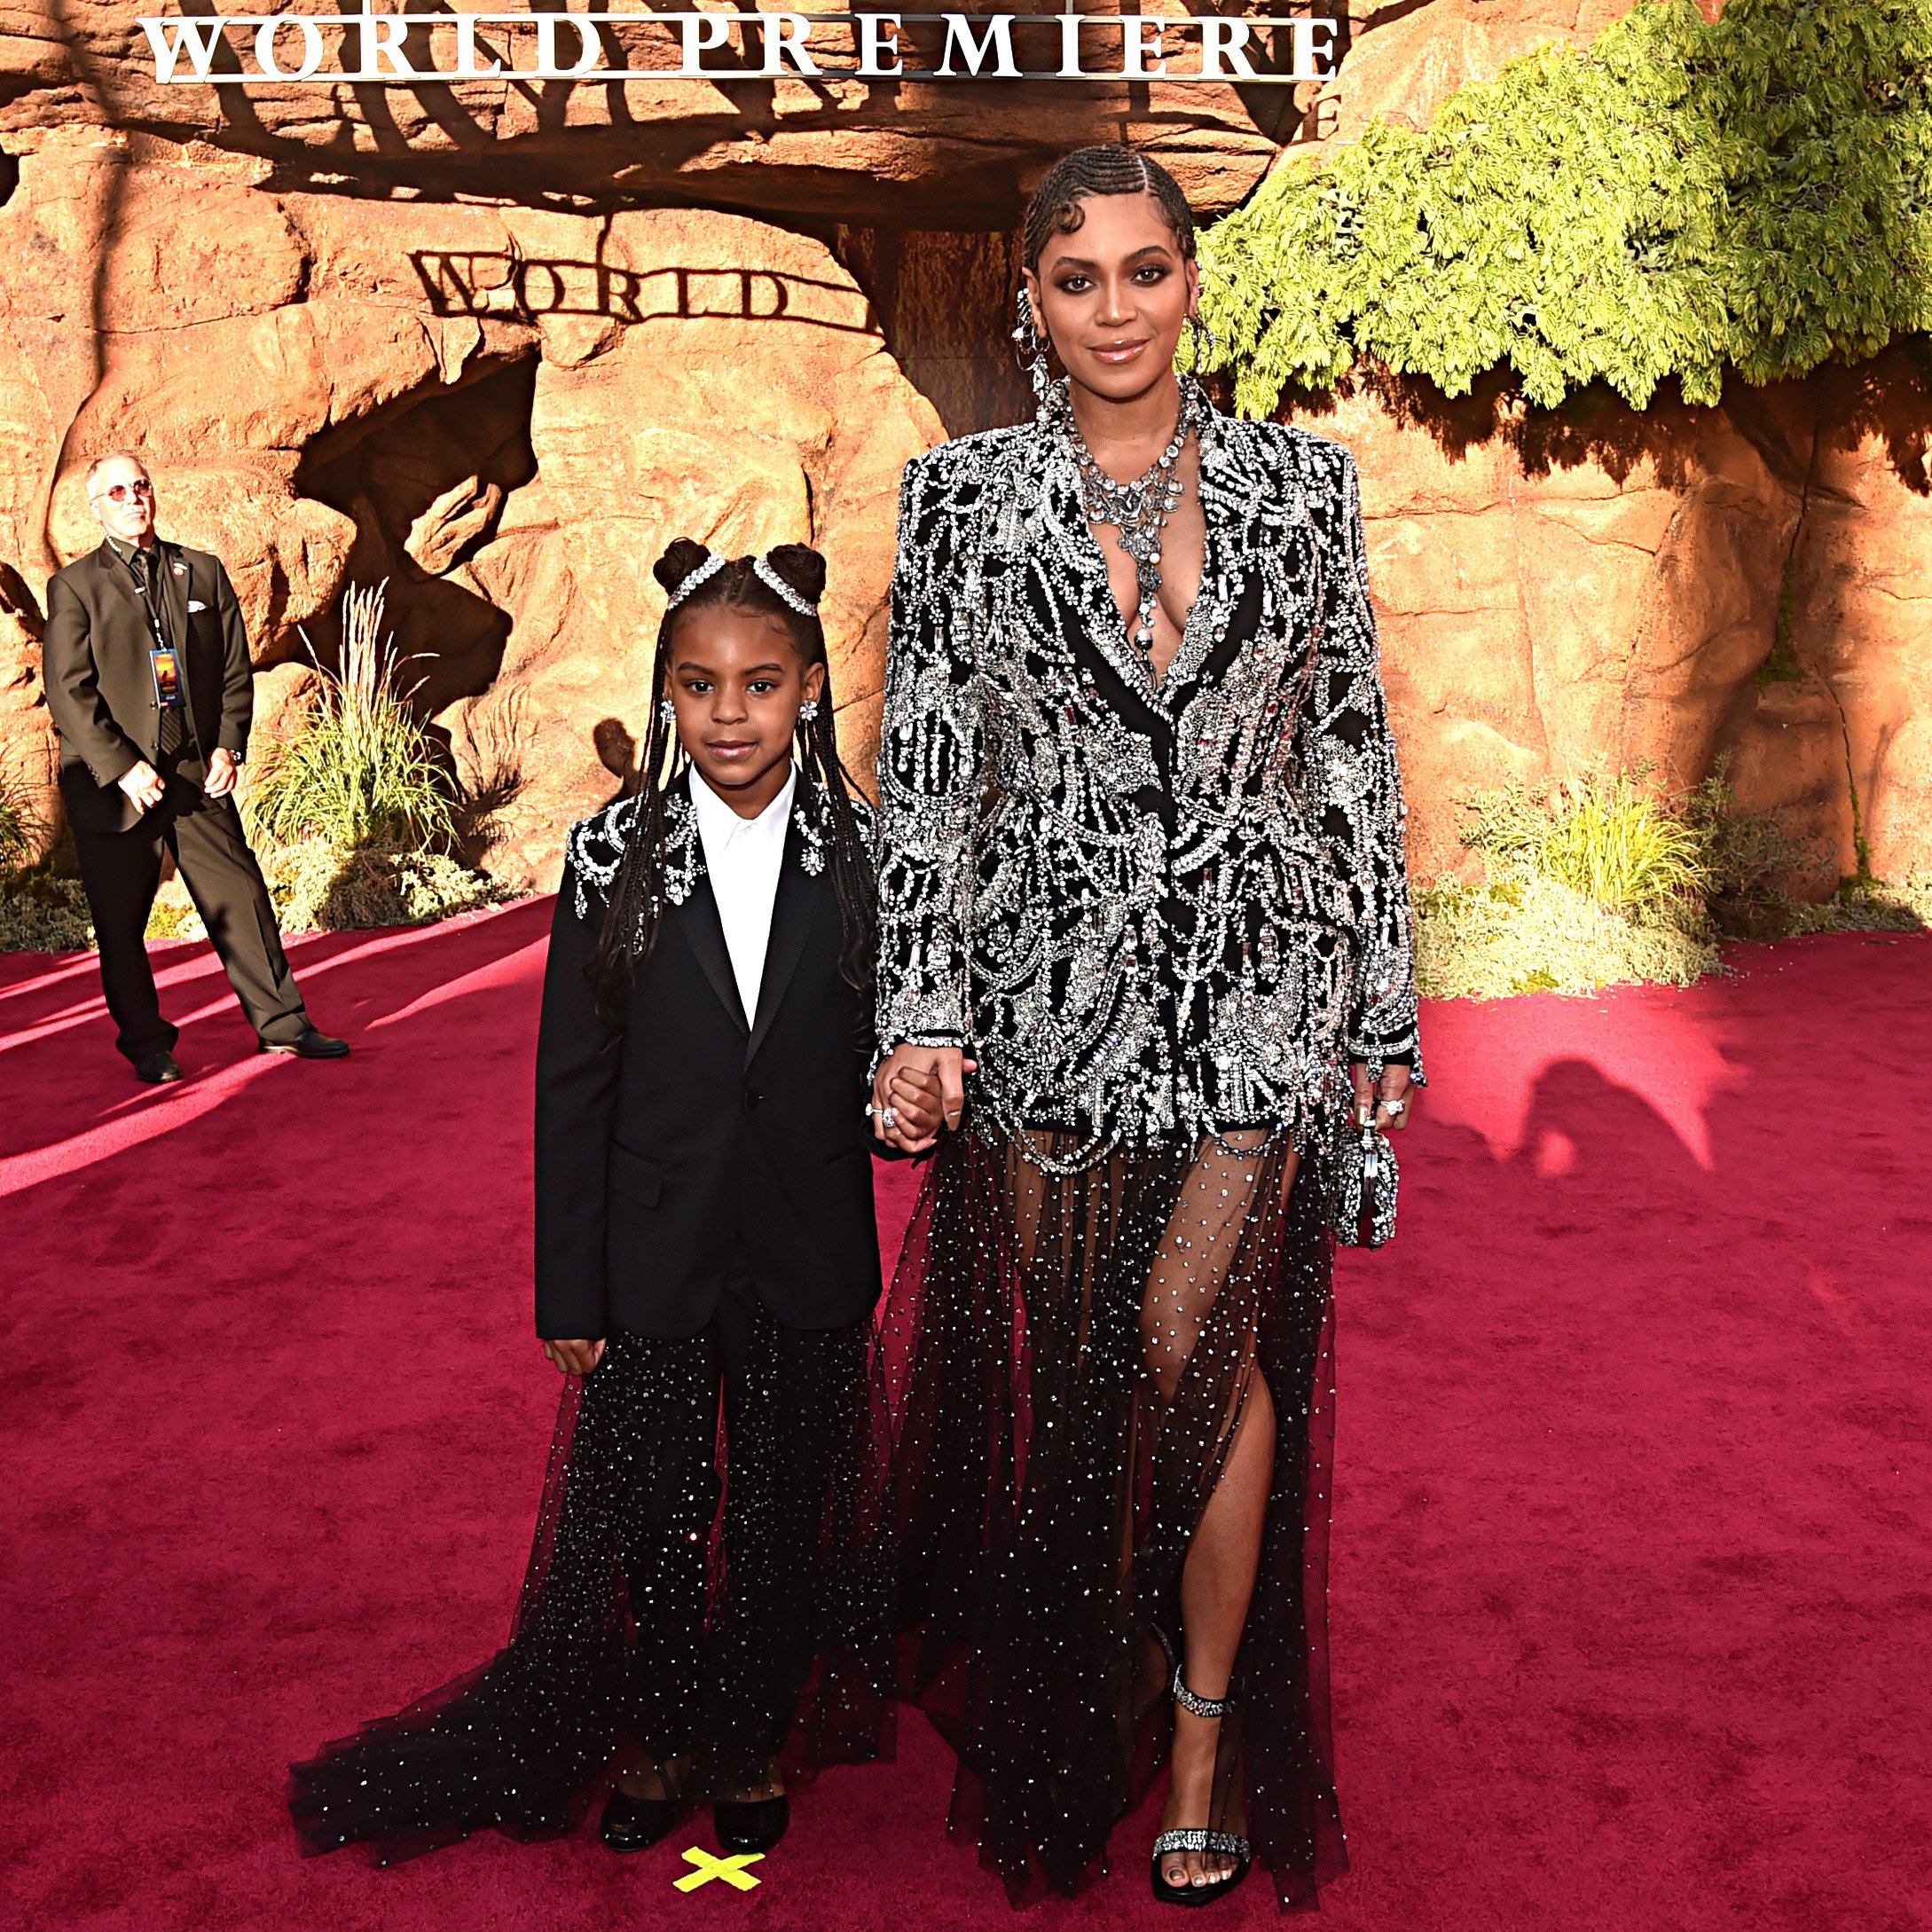 Beyonce and daughter, Blue Ivy Carter attending the Hollywood premiere of "The Lion King" in July 2019. | Photo: Getty Images